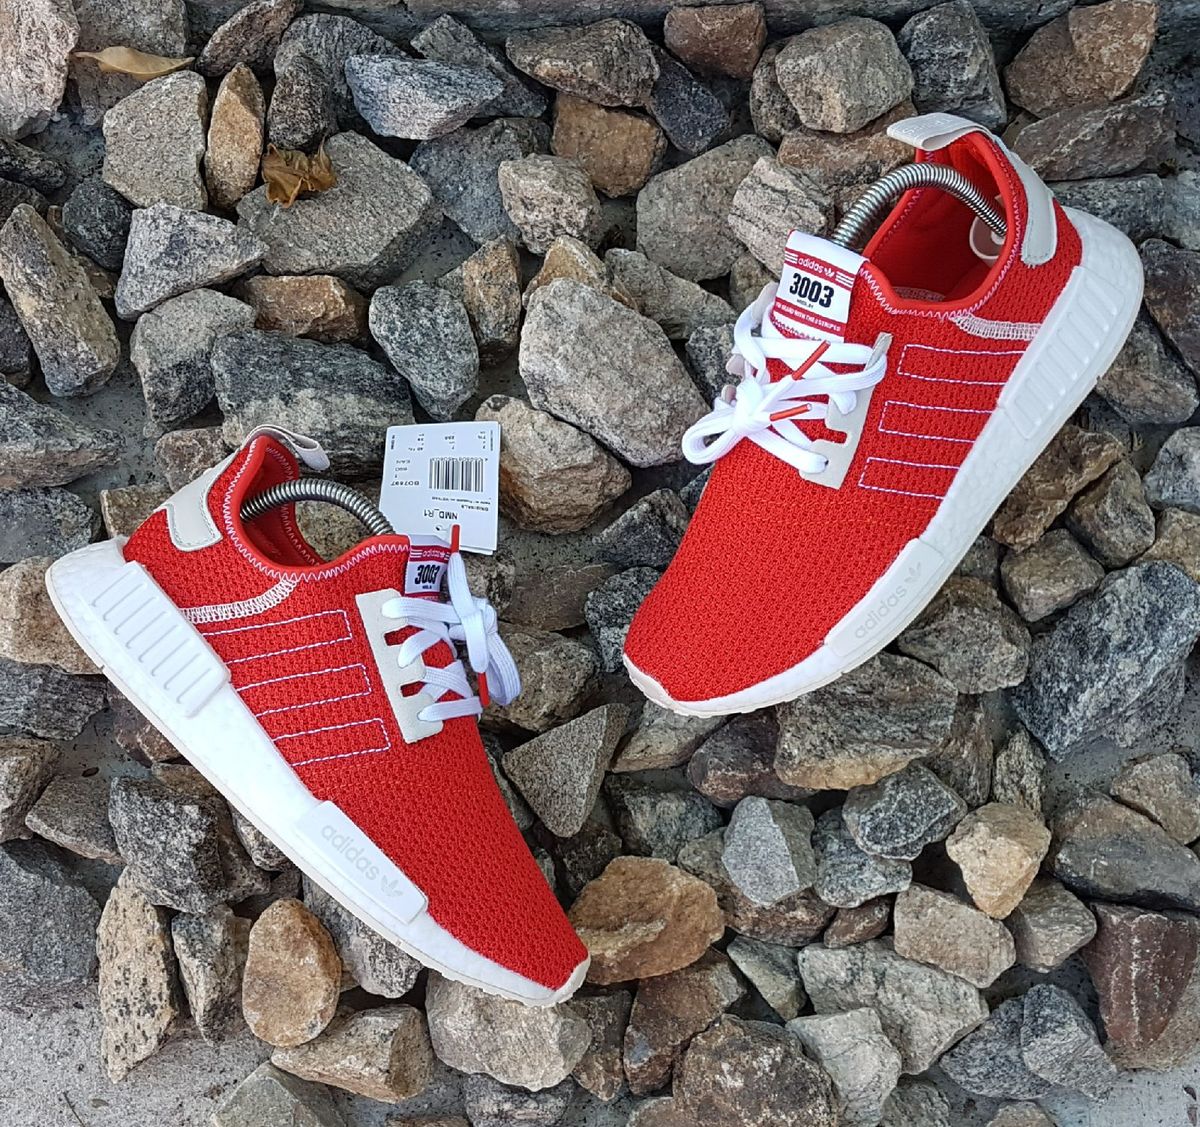 nmd 3003 red